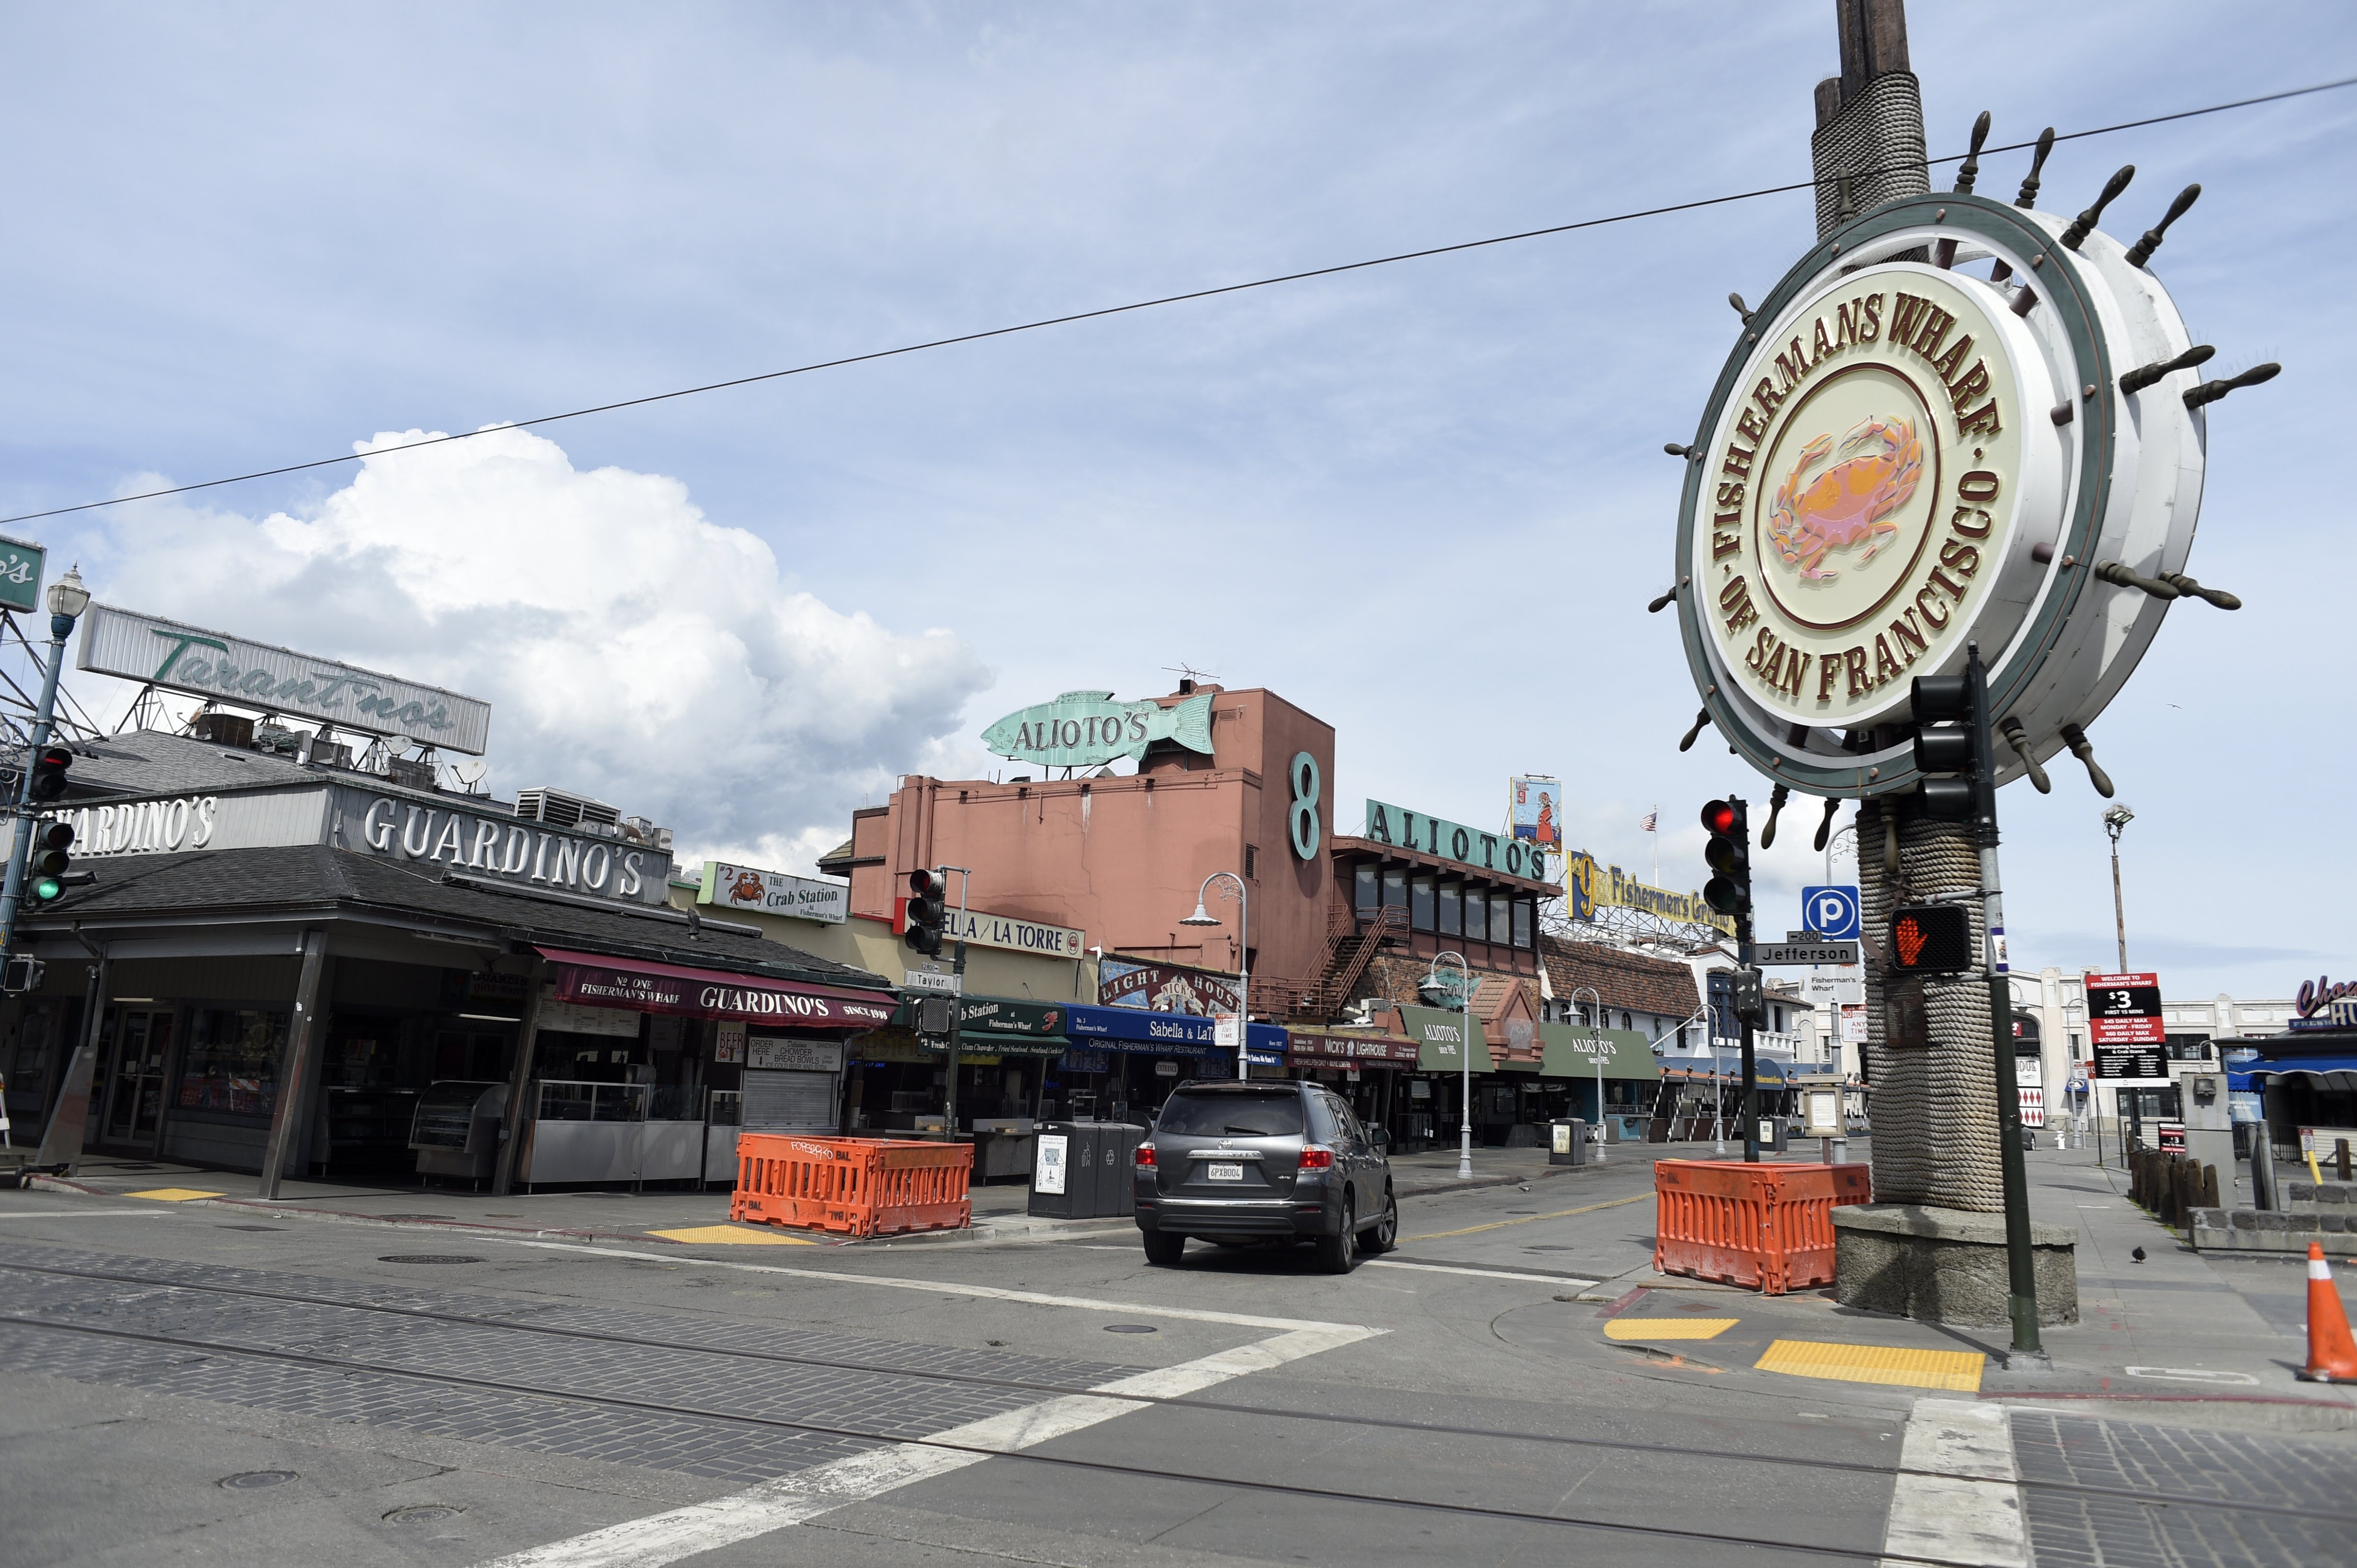 Fisherman's Wharf in San Francisco, normally crowded with tourists and locals, was virtually deserted on as millions of people in several Bay Area counties were under orders to stay in their homes starting March 17, 2020, to combat spread of the coronavirus. (Neal Waters—Anadolu Agency/Getty Images)